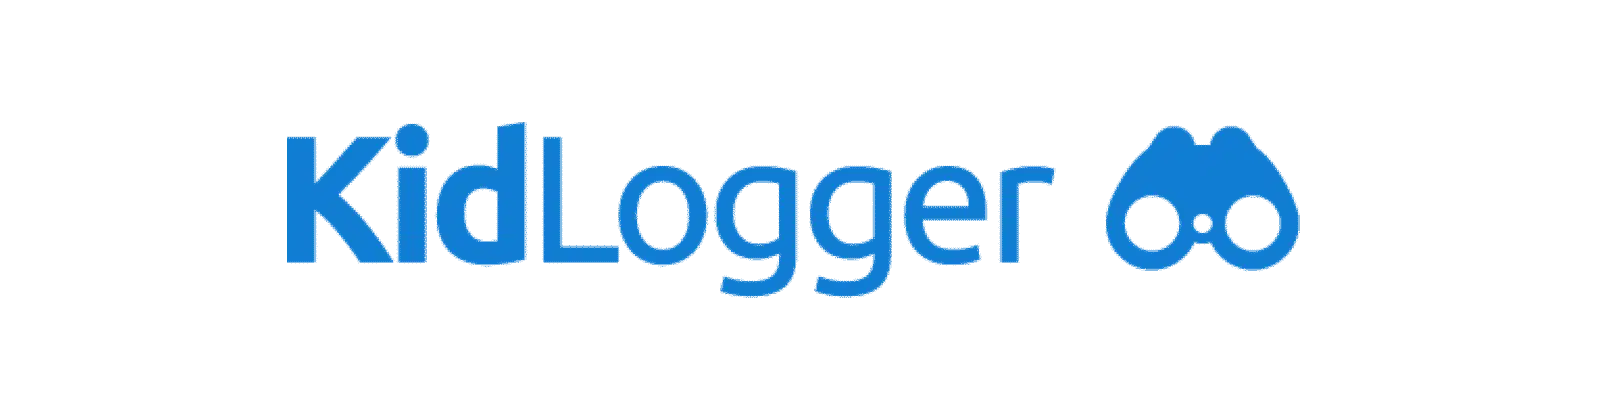 Compare Kidlogger With Others